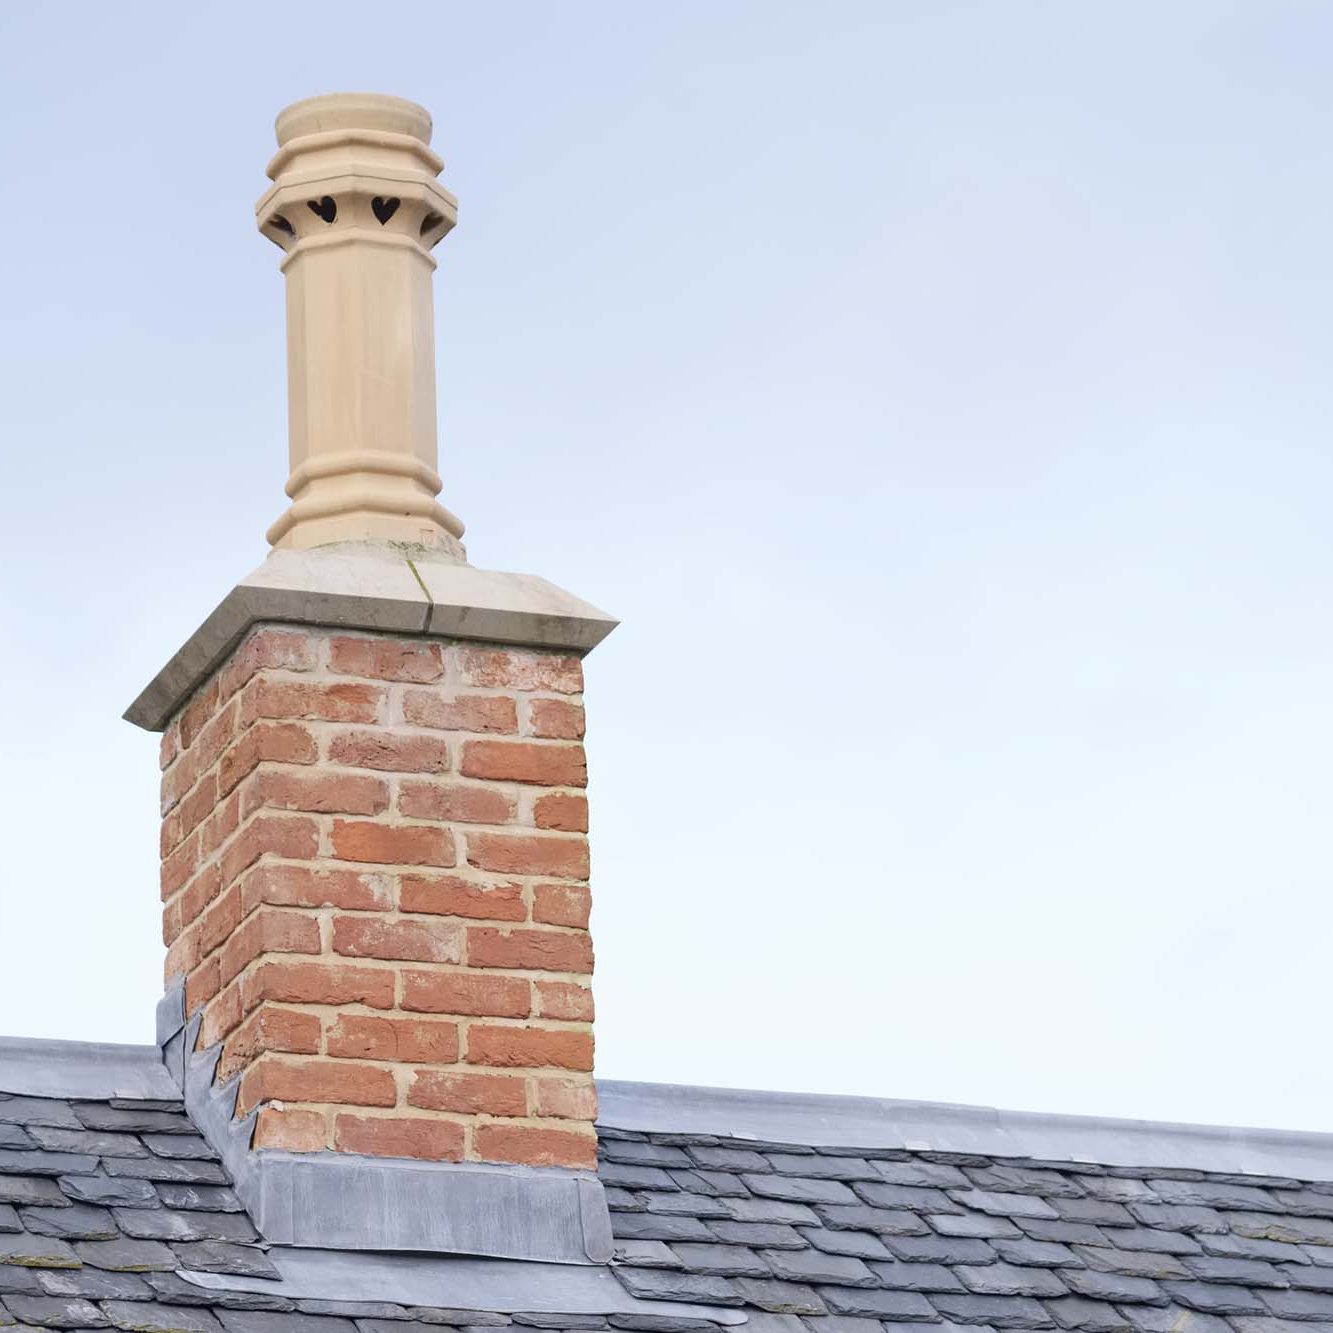 Chimney stack on roof of Victorian style property with blue sky